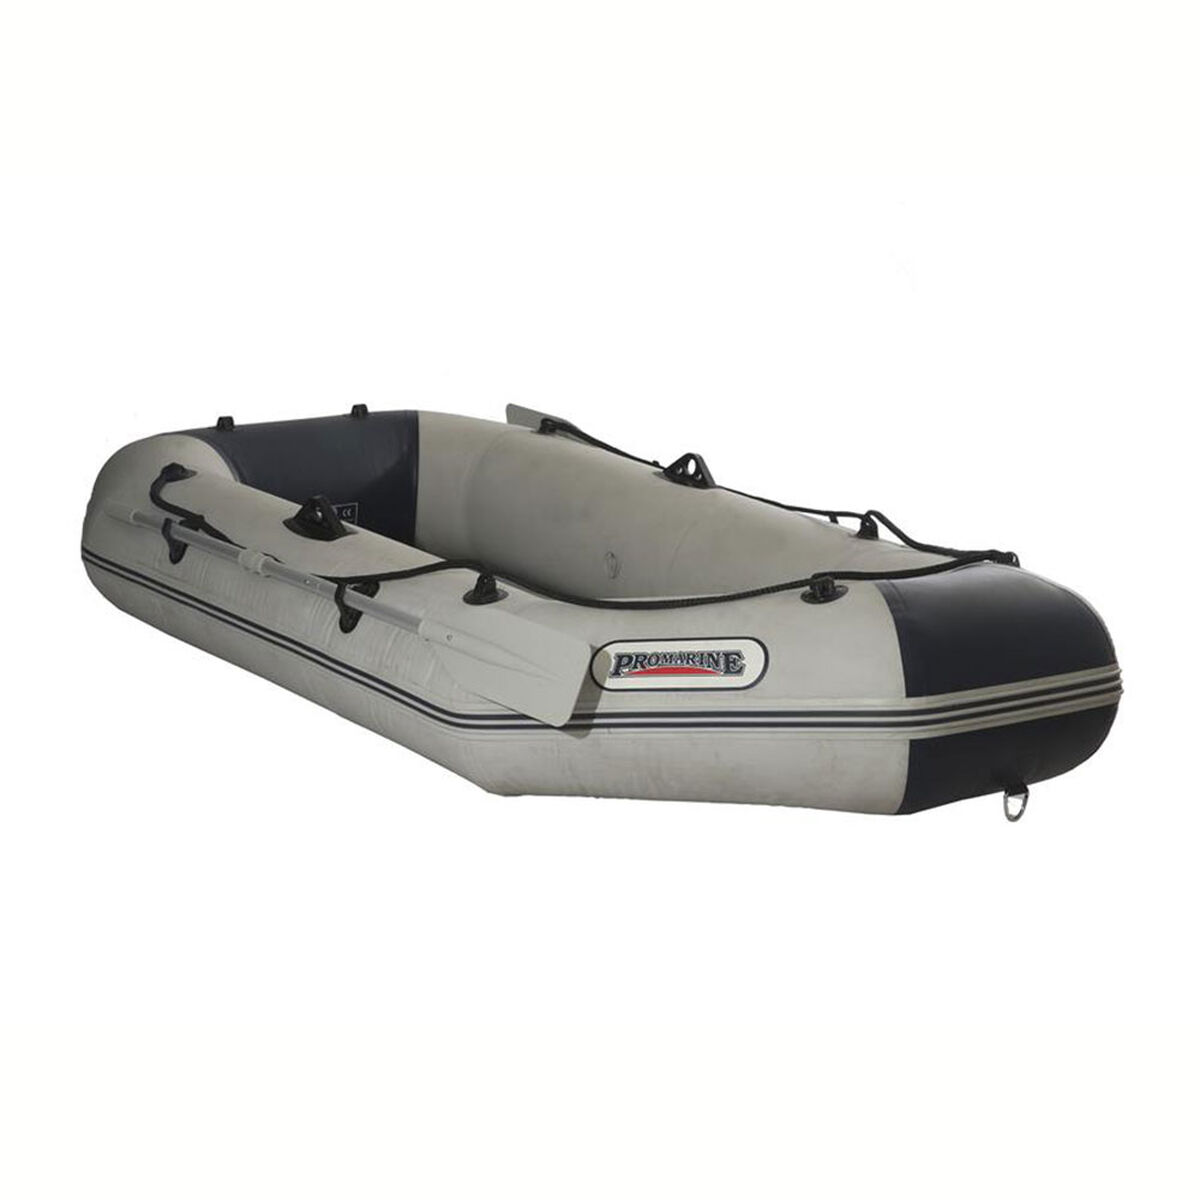 Bote Inflable IB 285